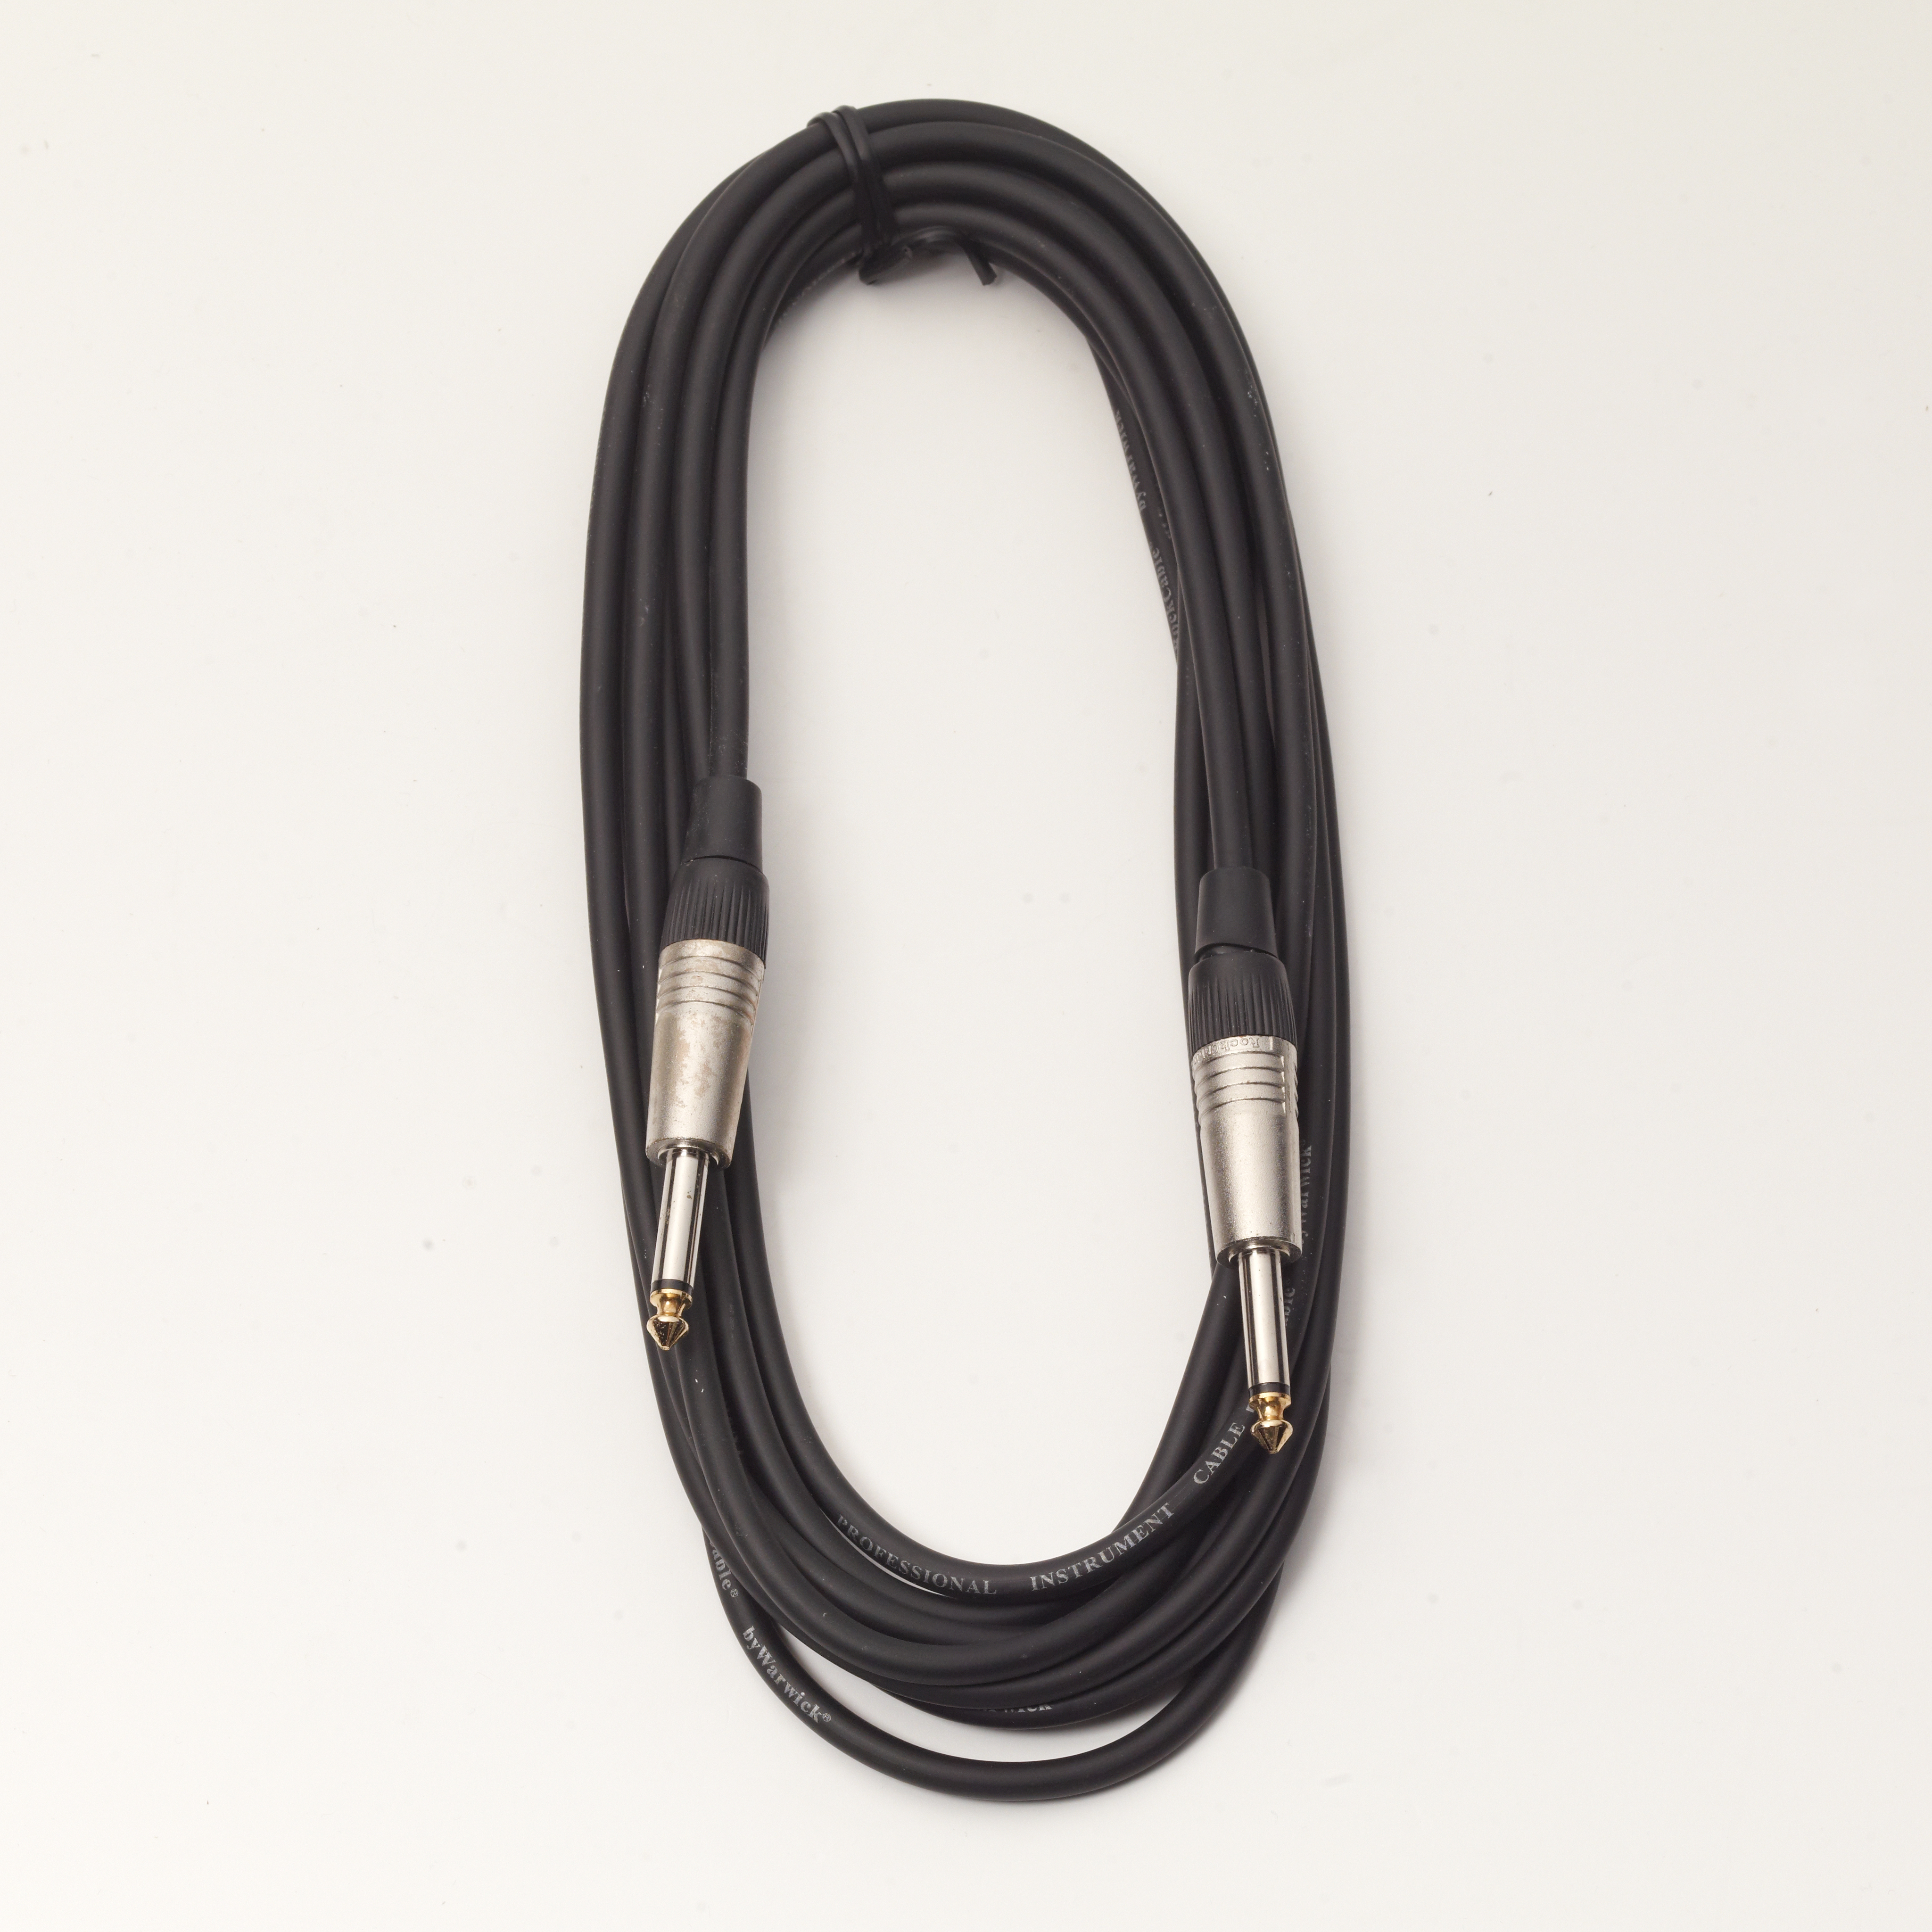 RockCable Instrument Cable - straight TS (6.3 mm / 1/4"), 5 m / 16.4 ft - Black